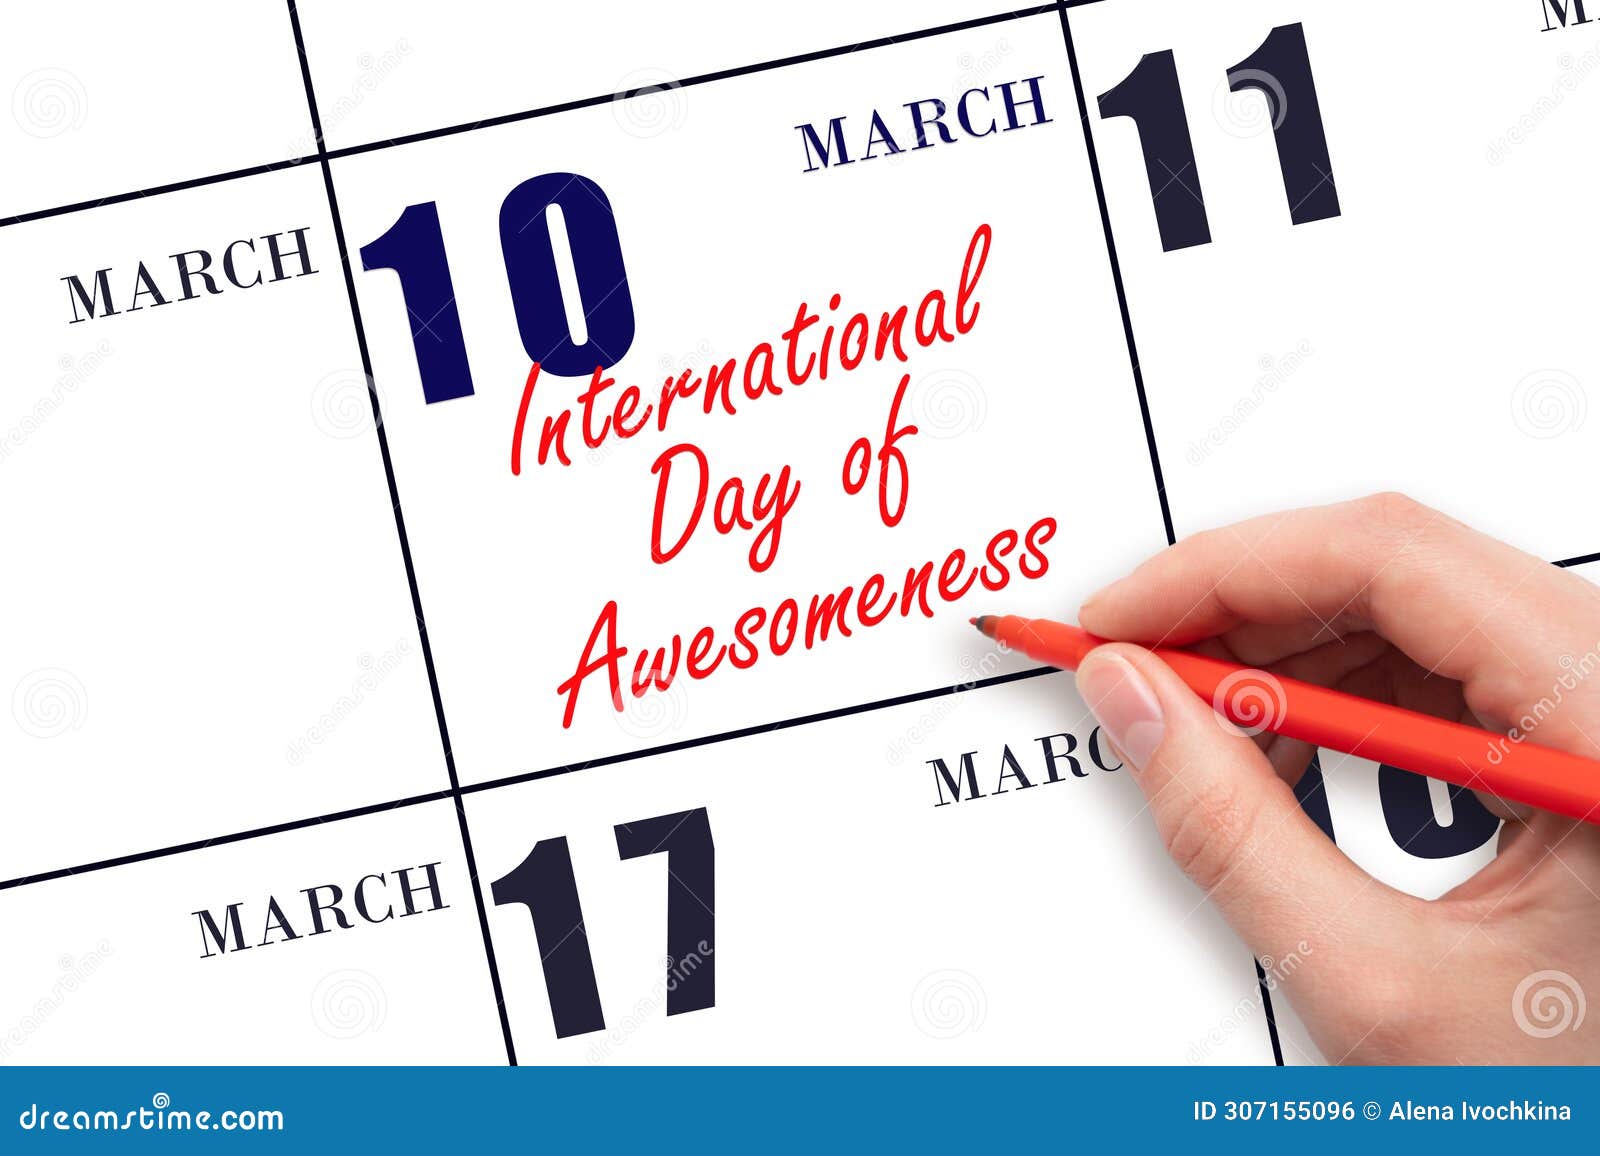 march 10. hand writing text international day of awesomeness on calendar date. save the date.